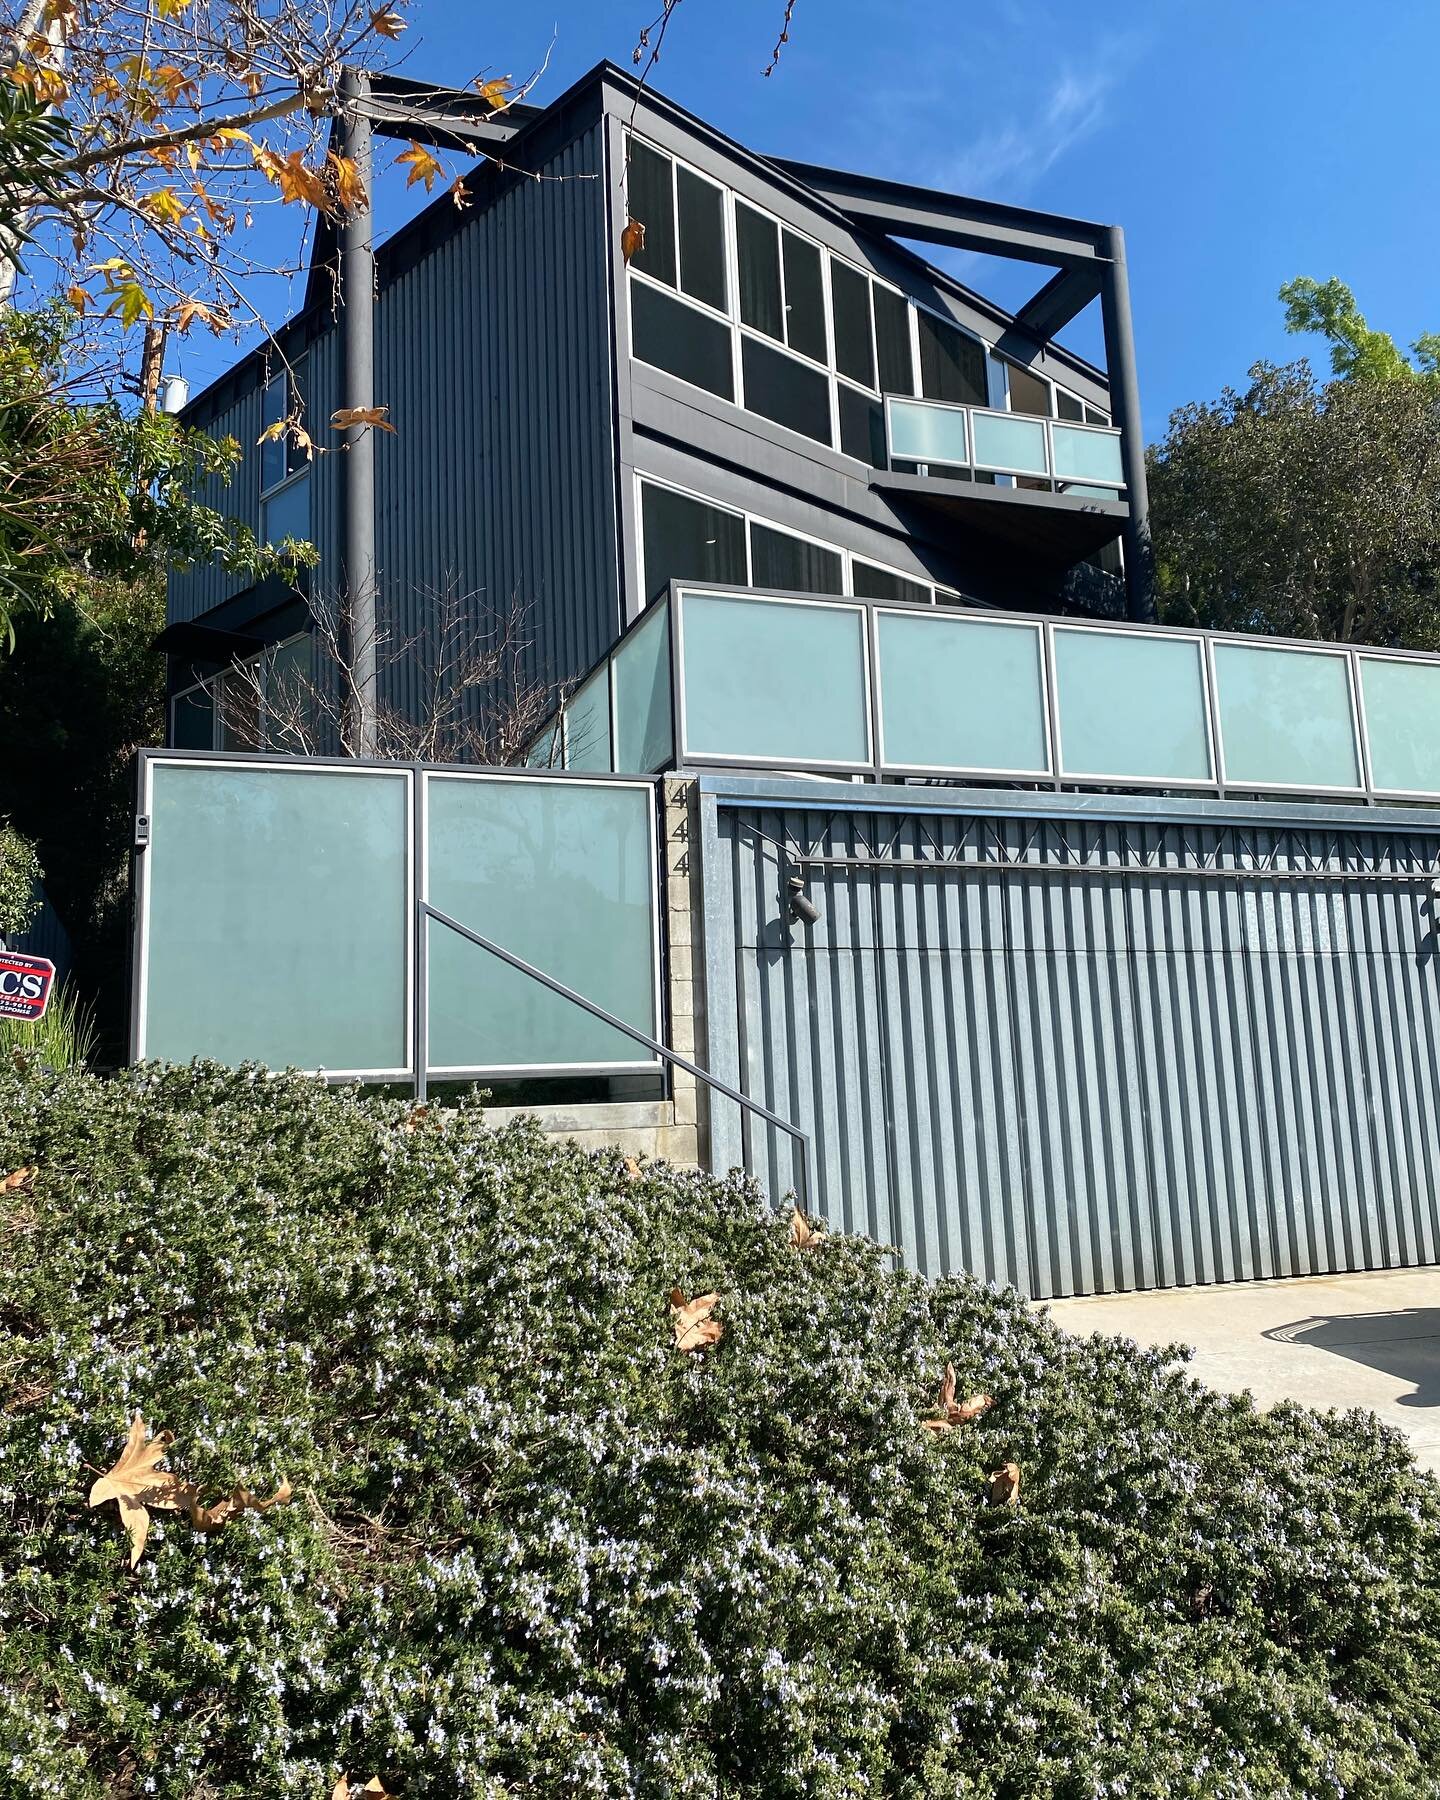 Rustic Canyon | Pierre Koenig&rsquo;s Schwartz House, 1994

Architectural gem nestled in the tranquil canyon of Santa Monica.  An industrial mixture of steel and concrete with a indoor outdoor flow allowing for natural dappled light throughout&hellip